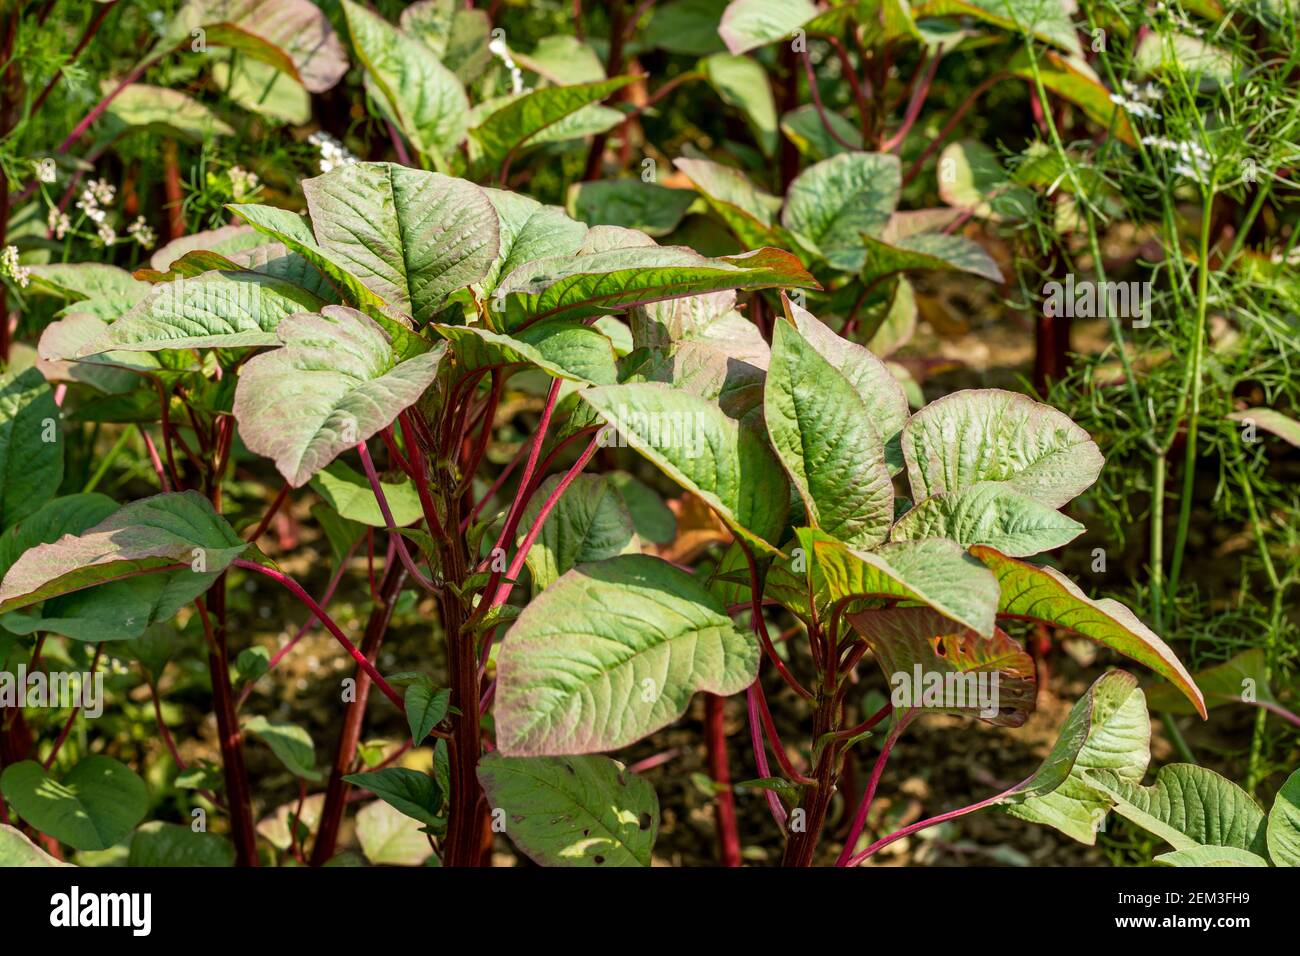 Amaranth species are cultivated and consumed as leaf vegetables in many parts of the world. Stem Amaranth Leaves, roots, and stems are a great vegetable Stock Photo